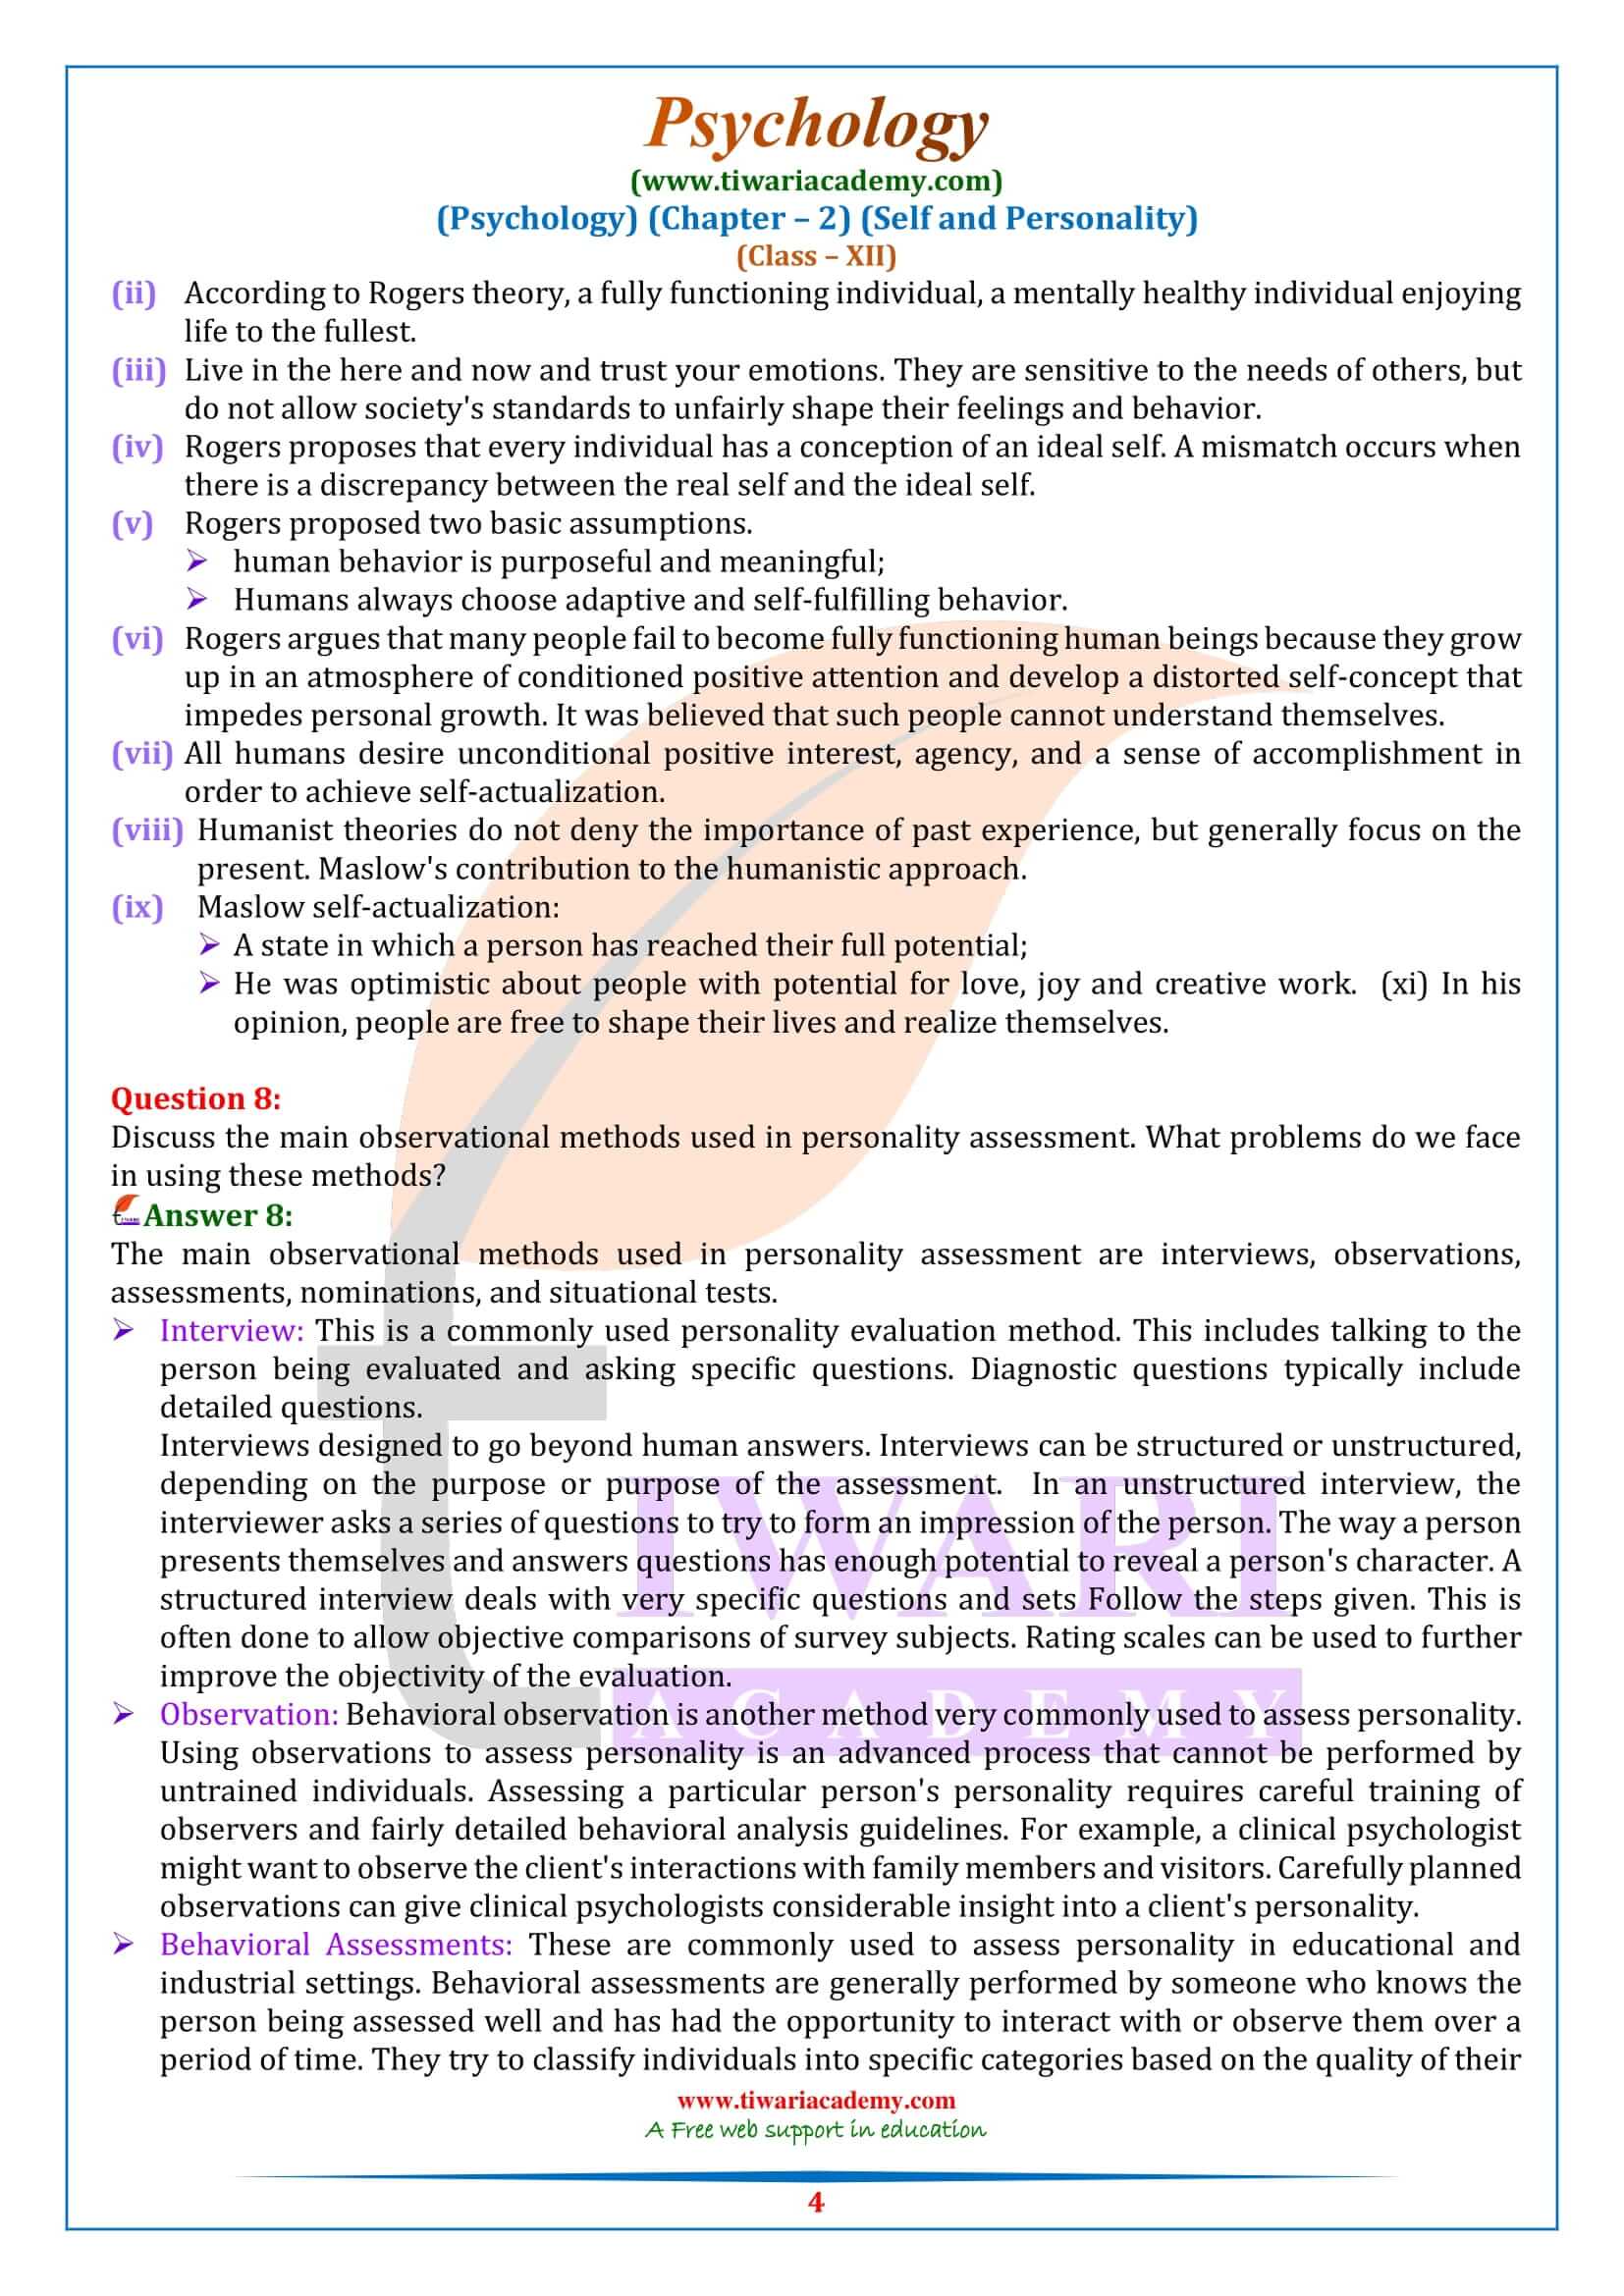 NCERT Solutions for Class 12 Psychology Chapter 2 exercise answers